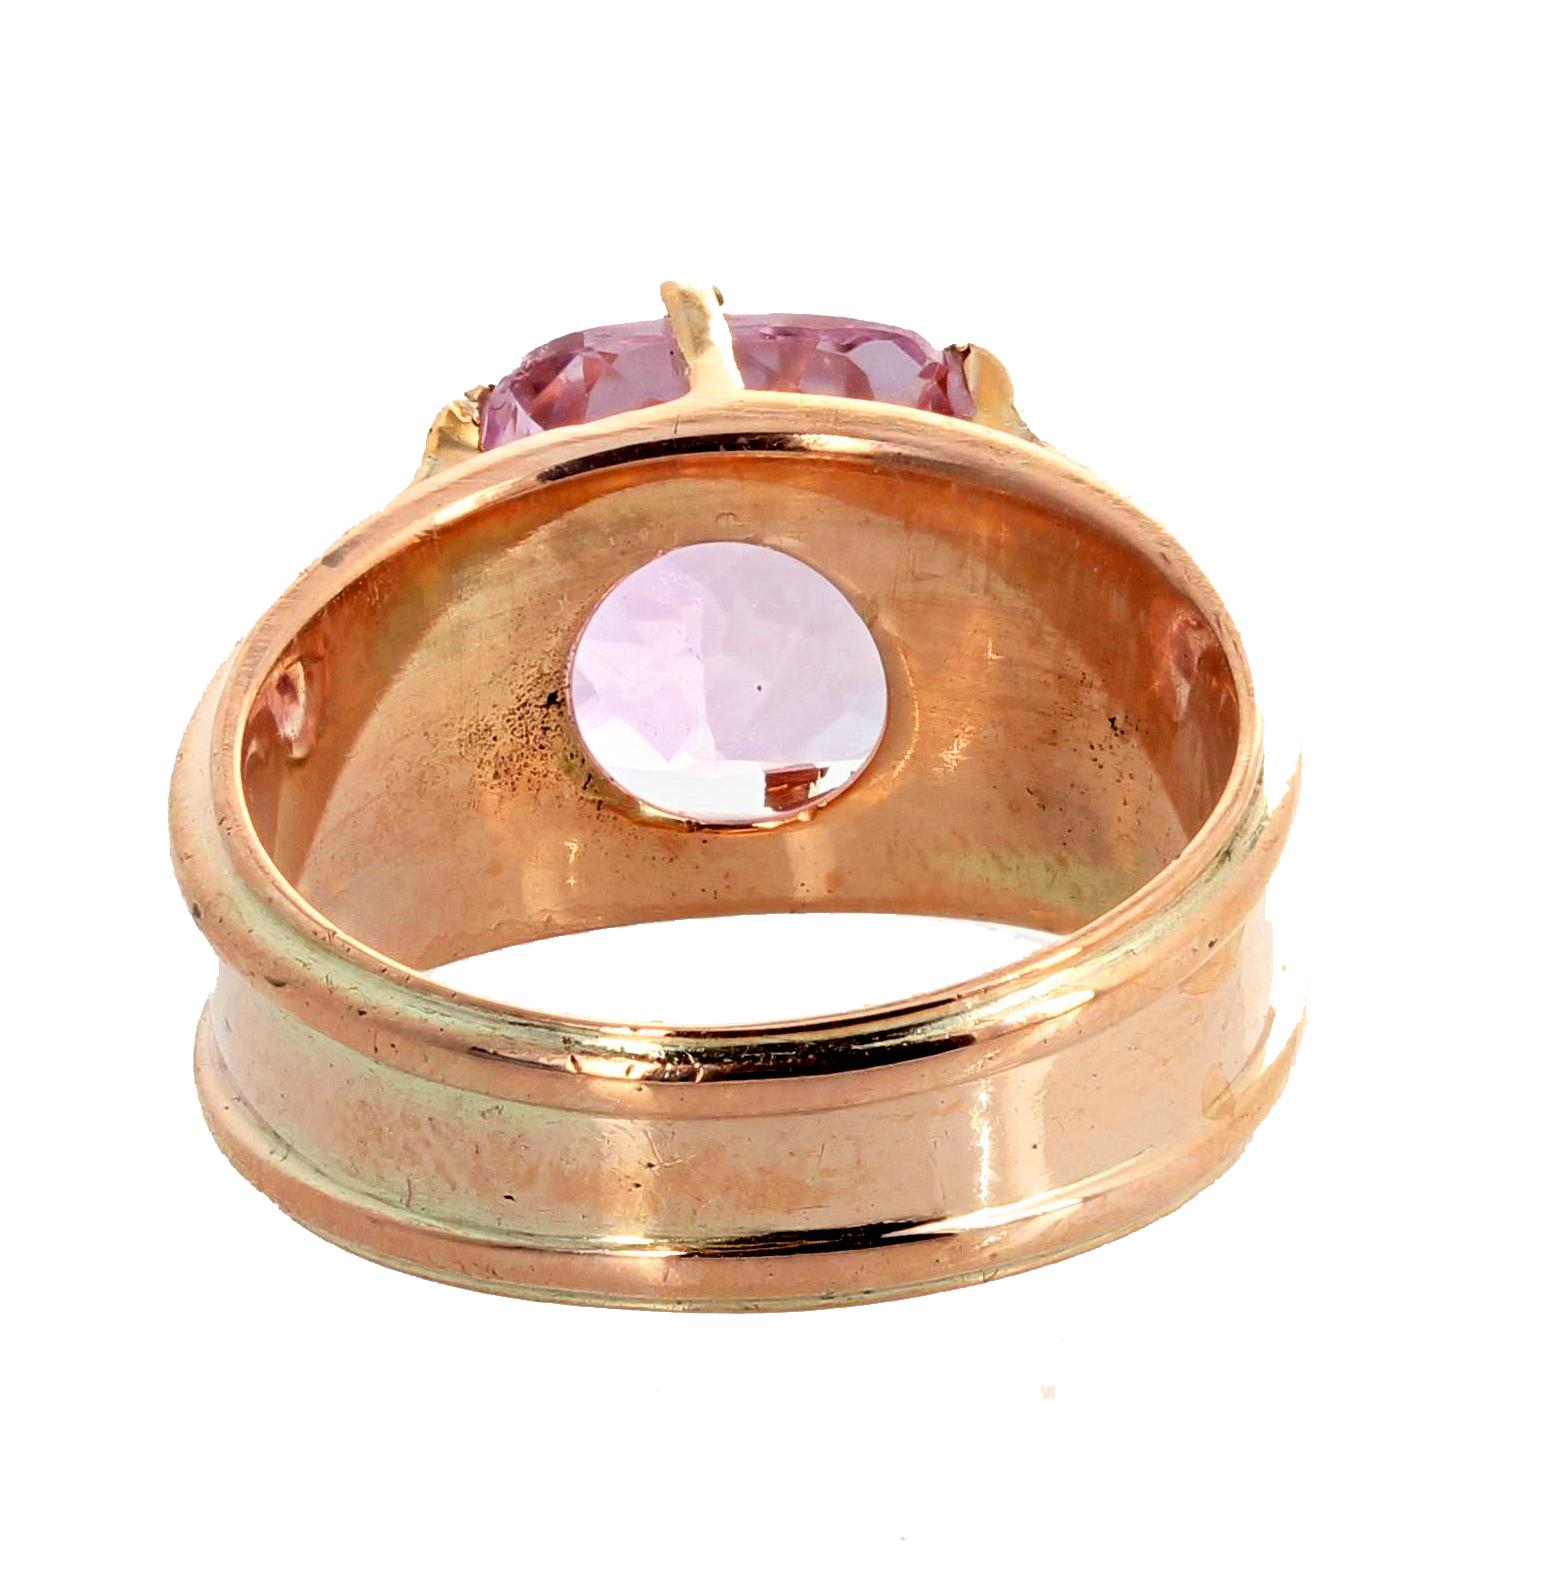 Women's or Men's AJD Fascinating Elegant 5.91 Ct Clear Kunzite Pink Gold Day to Evening Ring